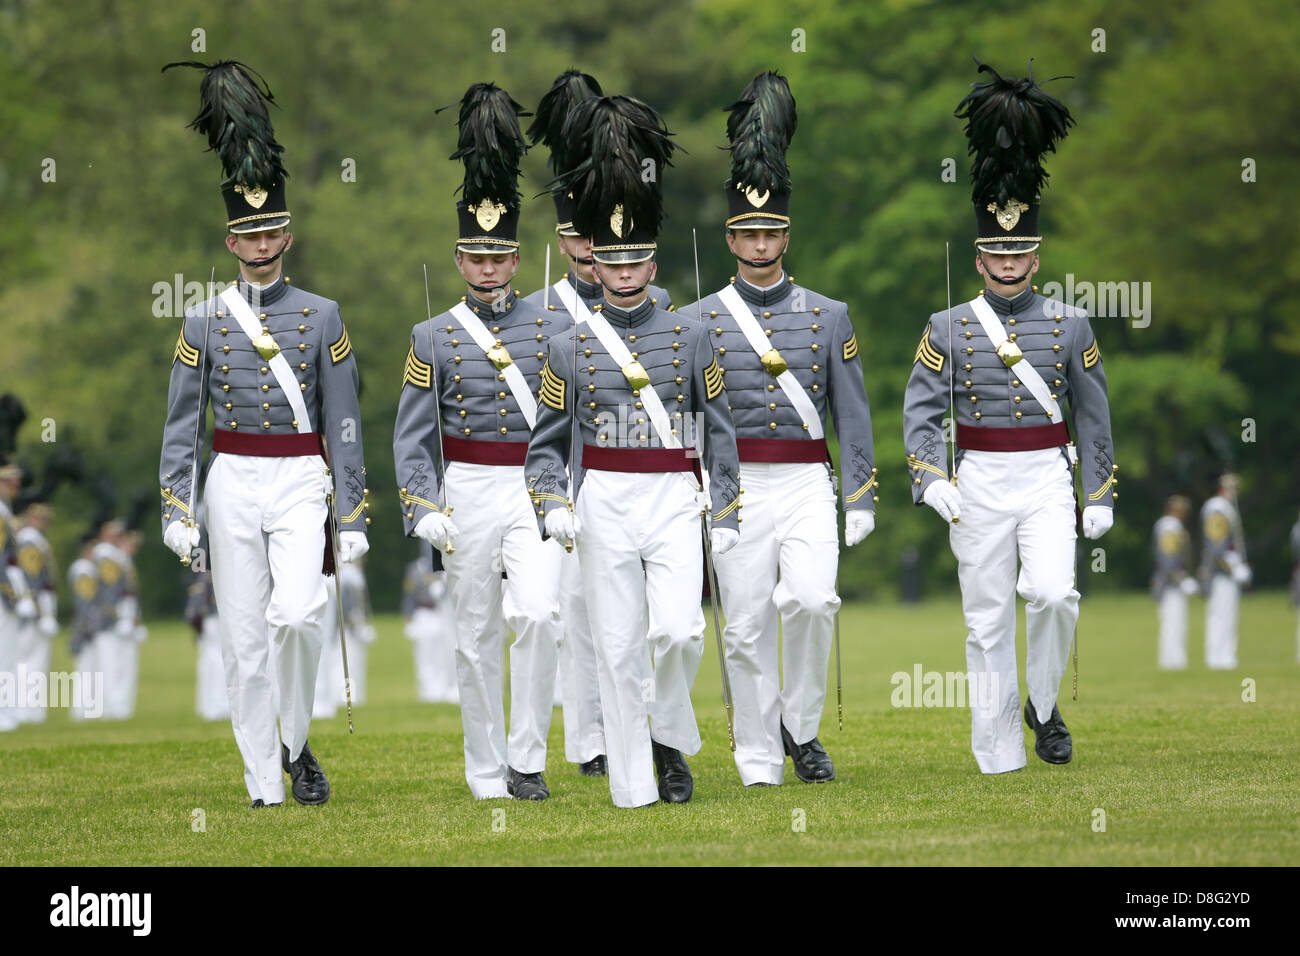 US Army Corps of Cadets march on the Plain during the annual Alumni Review at the West Point Military Academy May 21, 2013 in West Point, NY. Stock Photo